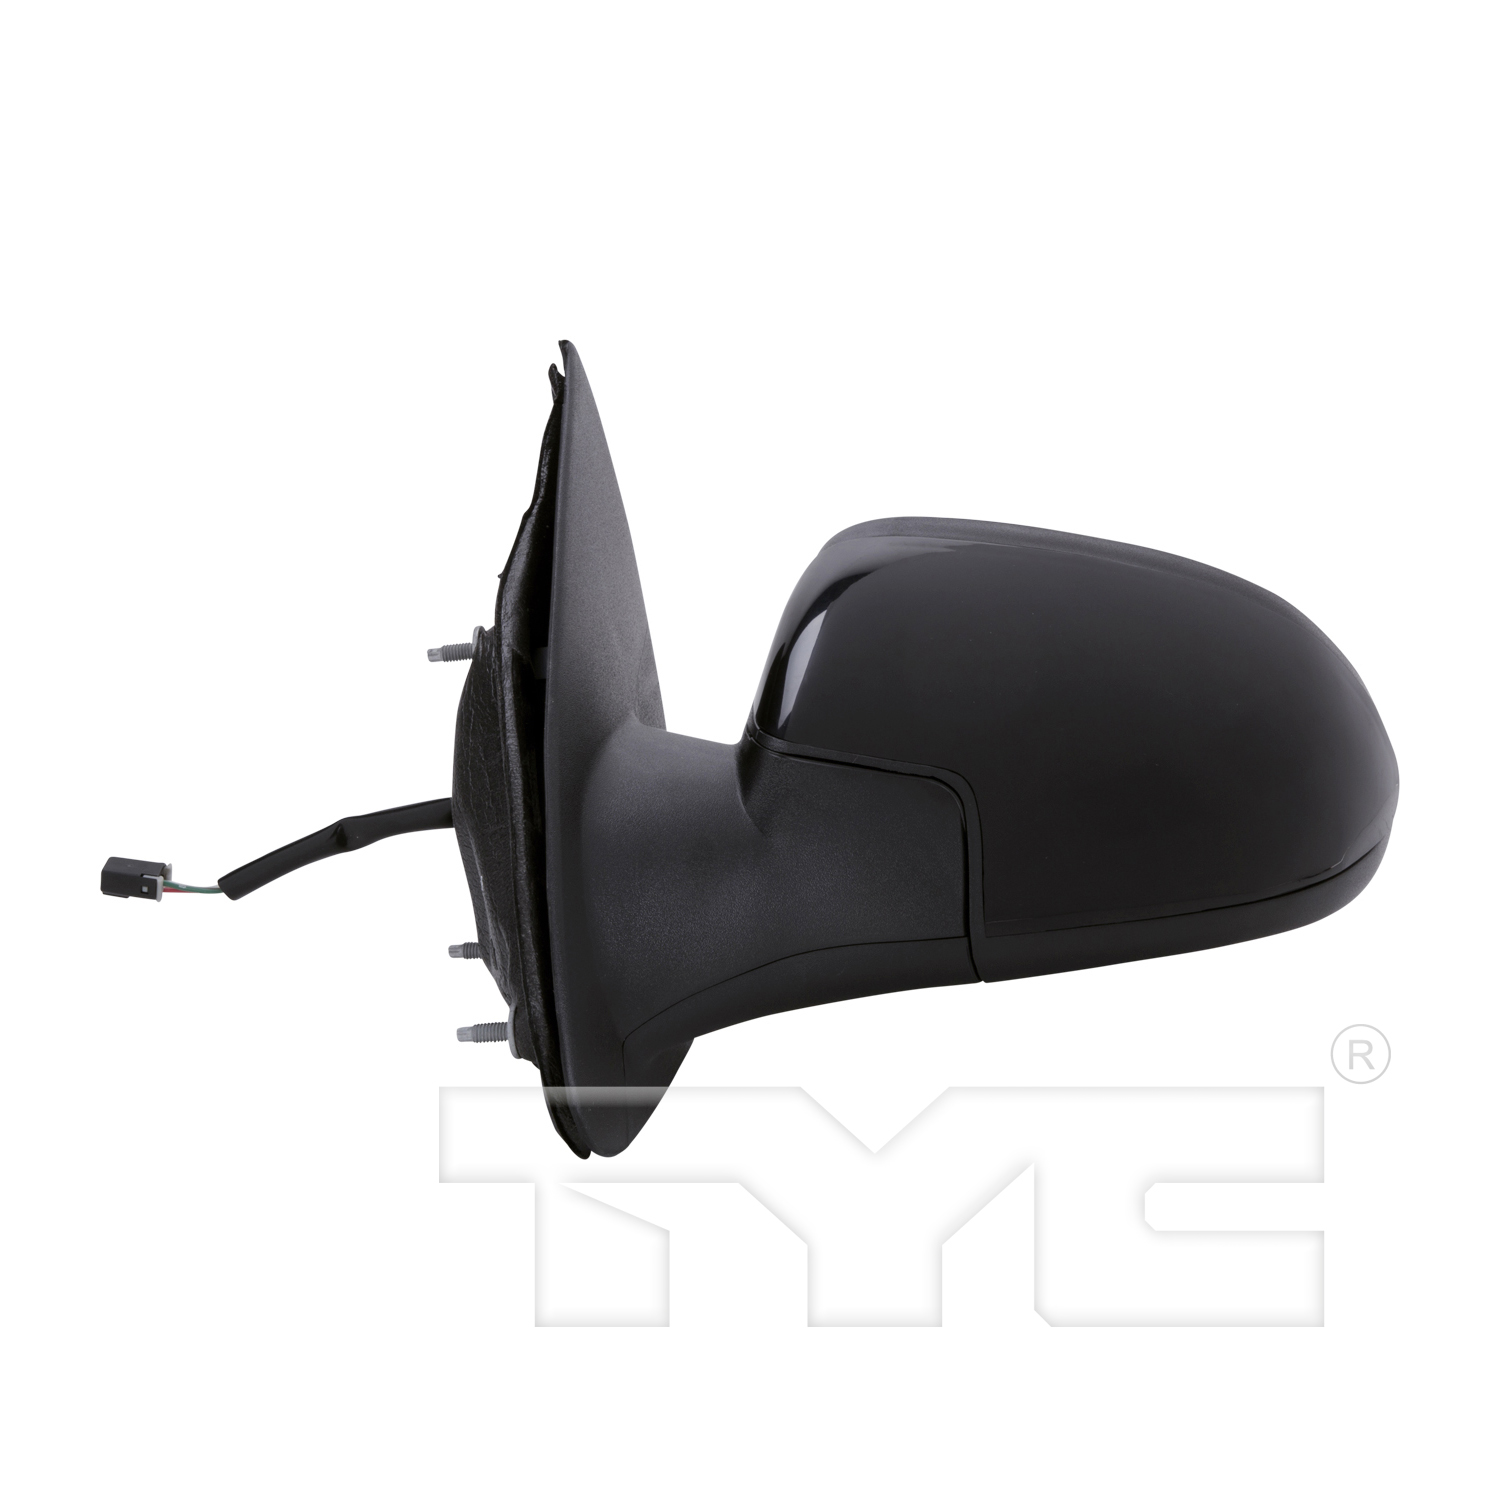 Aftermarket MIRRORS for PONTIAC - G5, G5,07-10,LT Mirror outside rear view